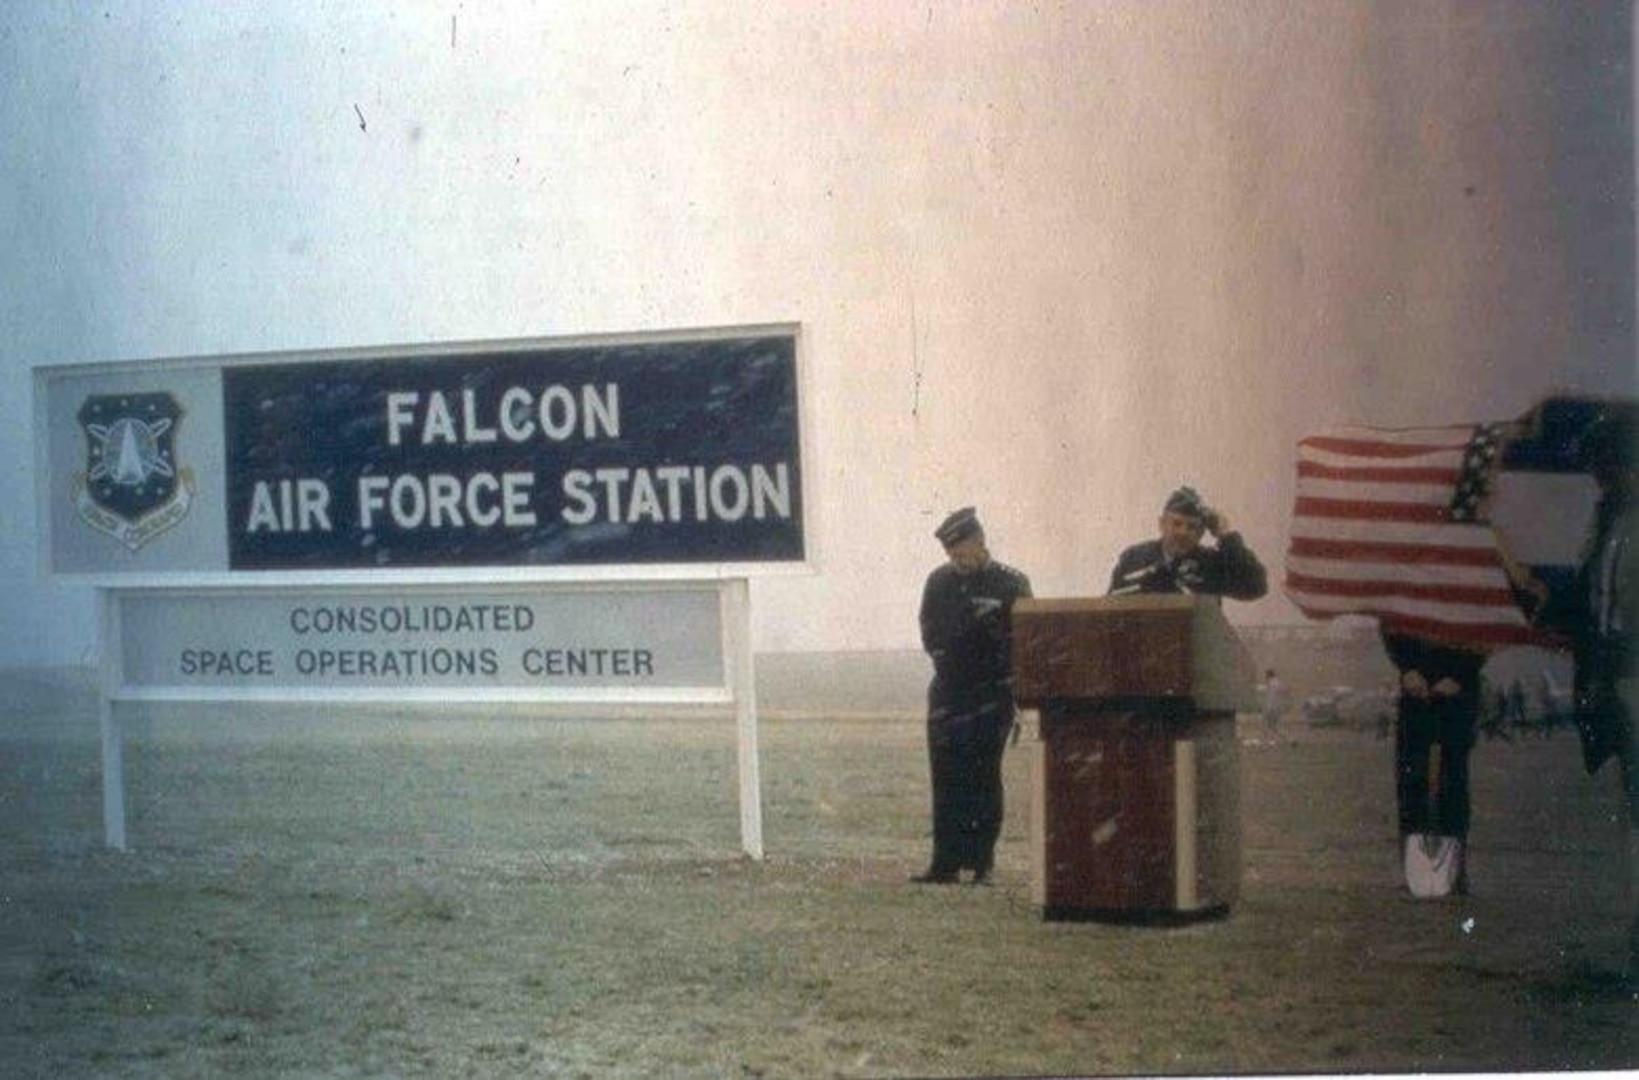 Air Force leaders ceremonially break ground on the Consolidated Space Operations Center and Falcon Air Force Station on May 17, 1983. The base was renamed Falcon Air Force Base on June 13, 1988. (Courtesy photo)